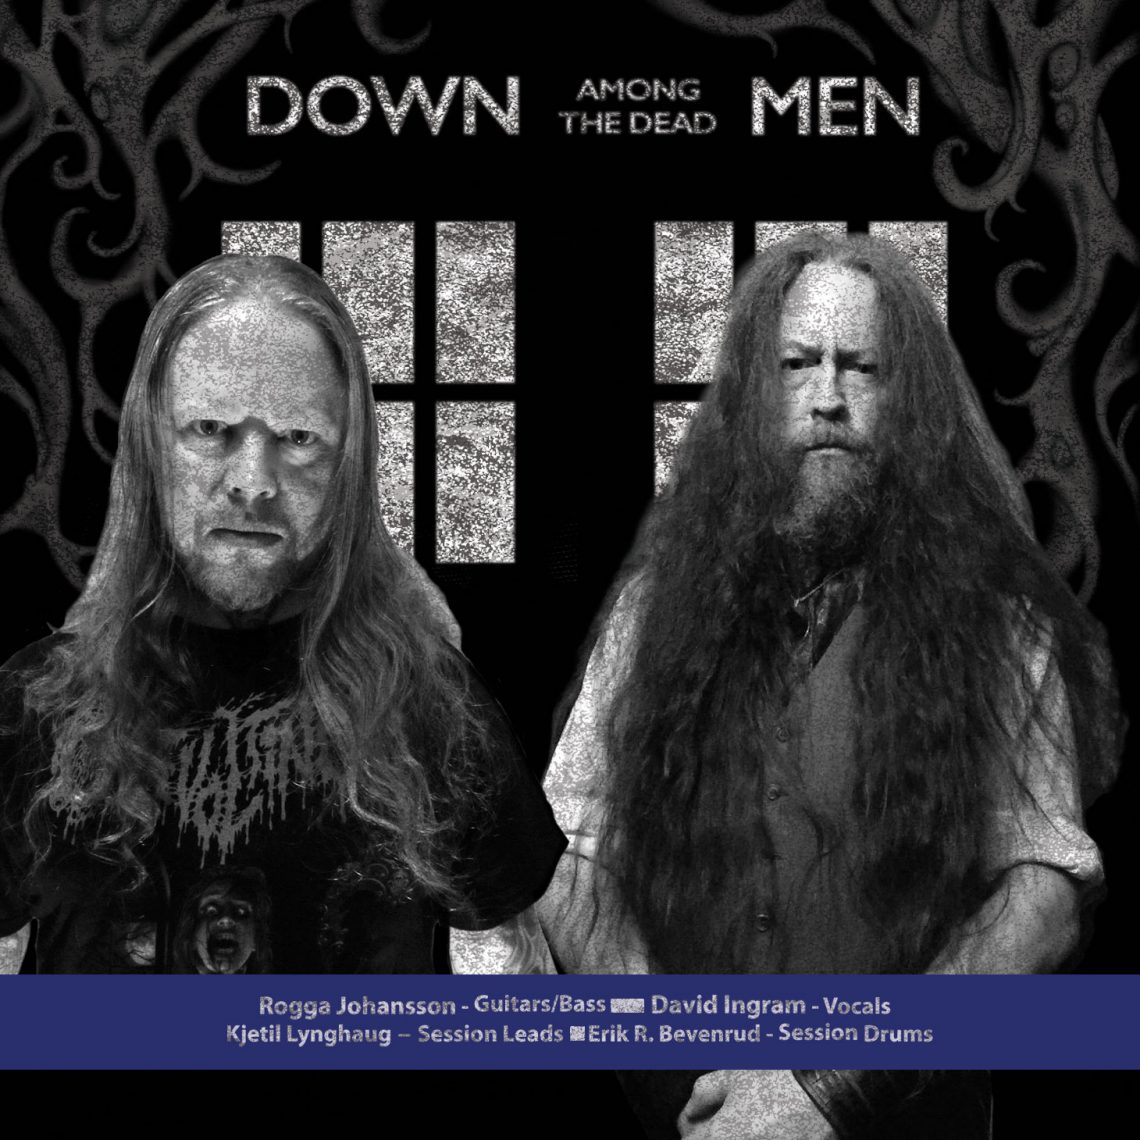 Down Among The Dead Men release is out now!